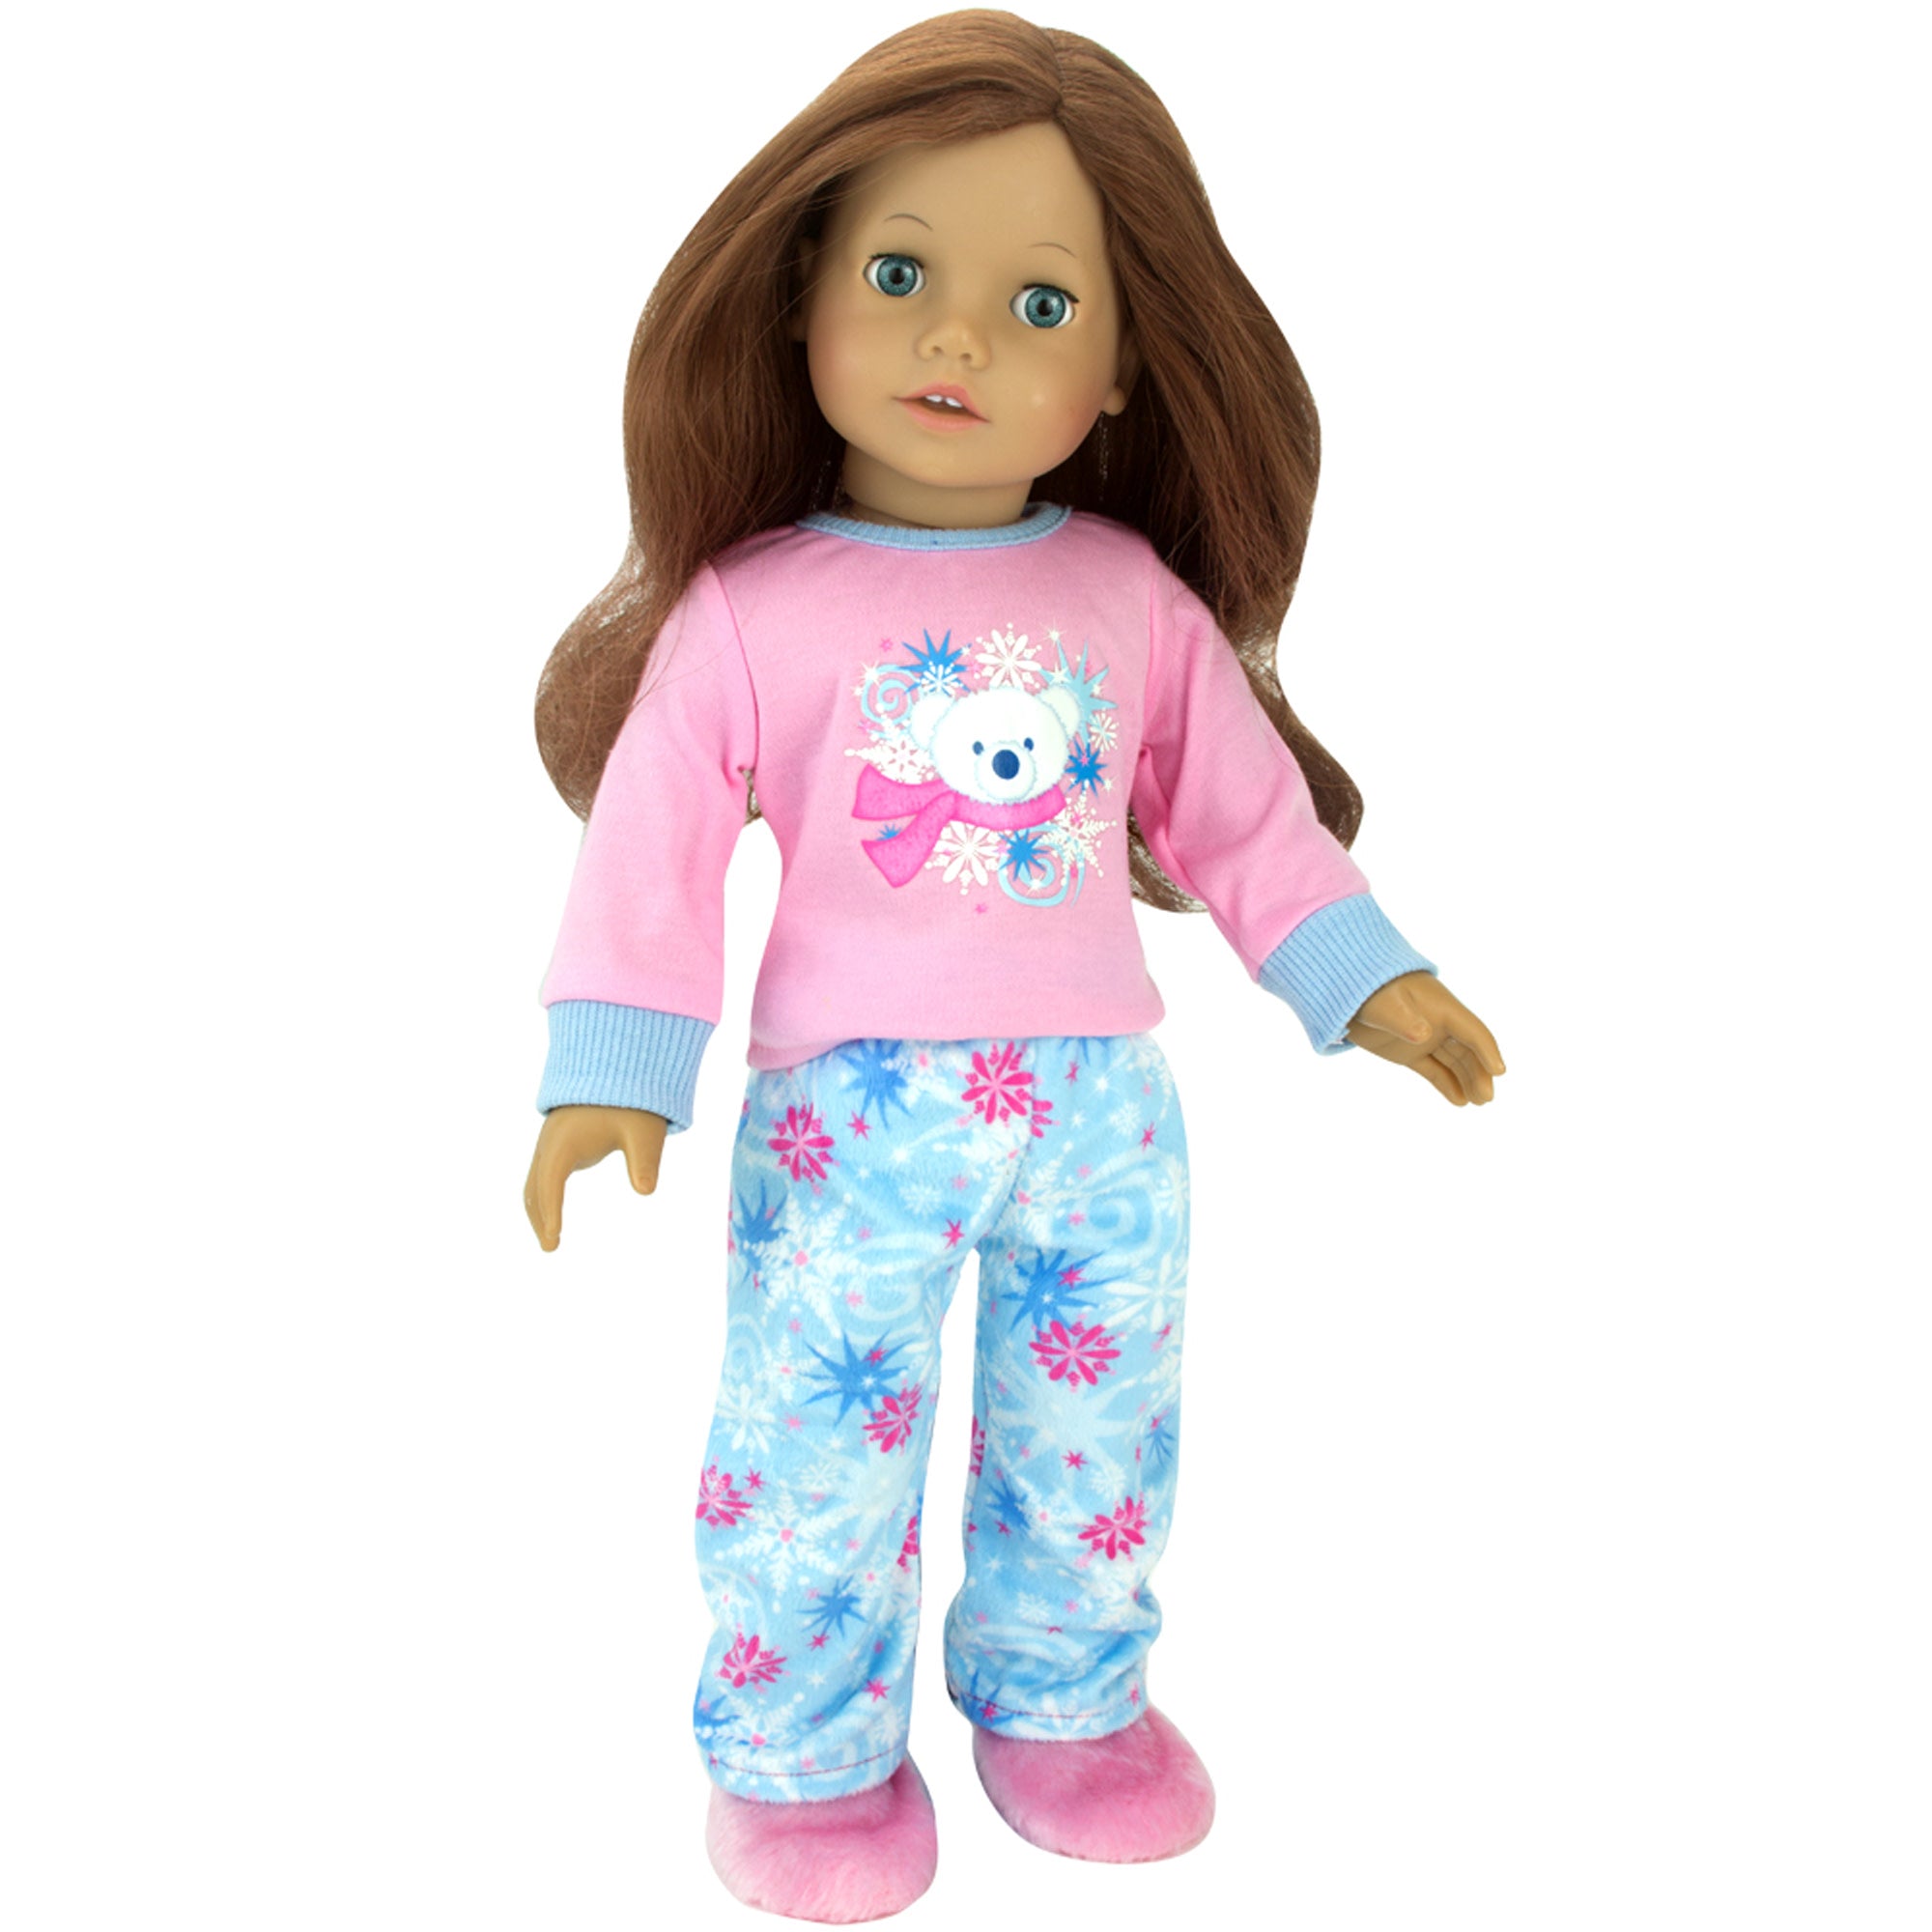 Sophia's 3 Piece Winter Pajamas with Polar Bear Shirt, Fleece Pants and Slippers for 18" Dolls, Pink/Blue